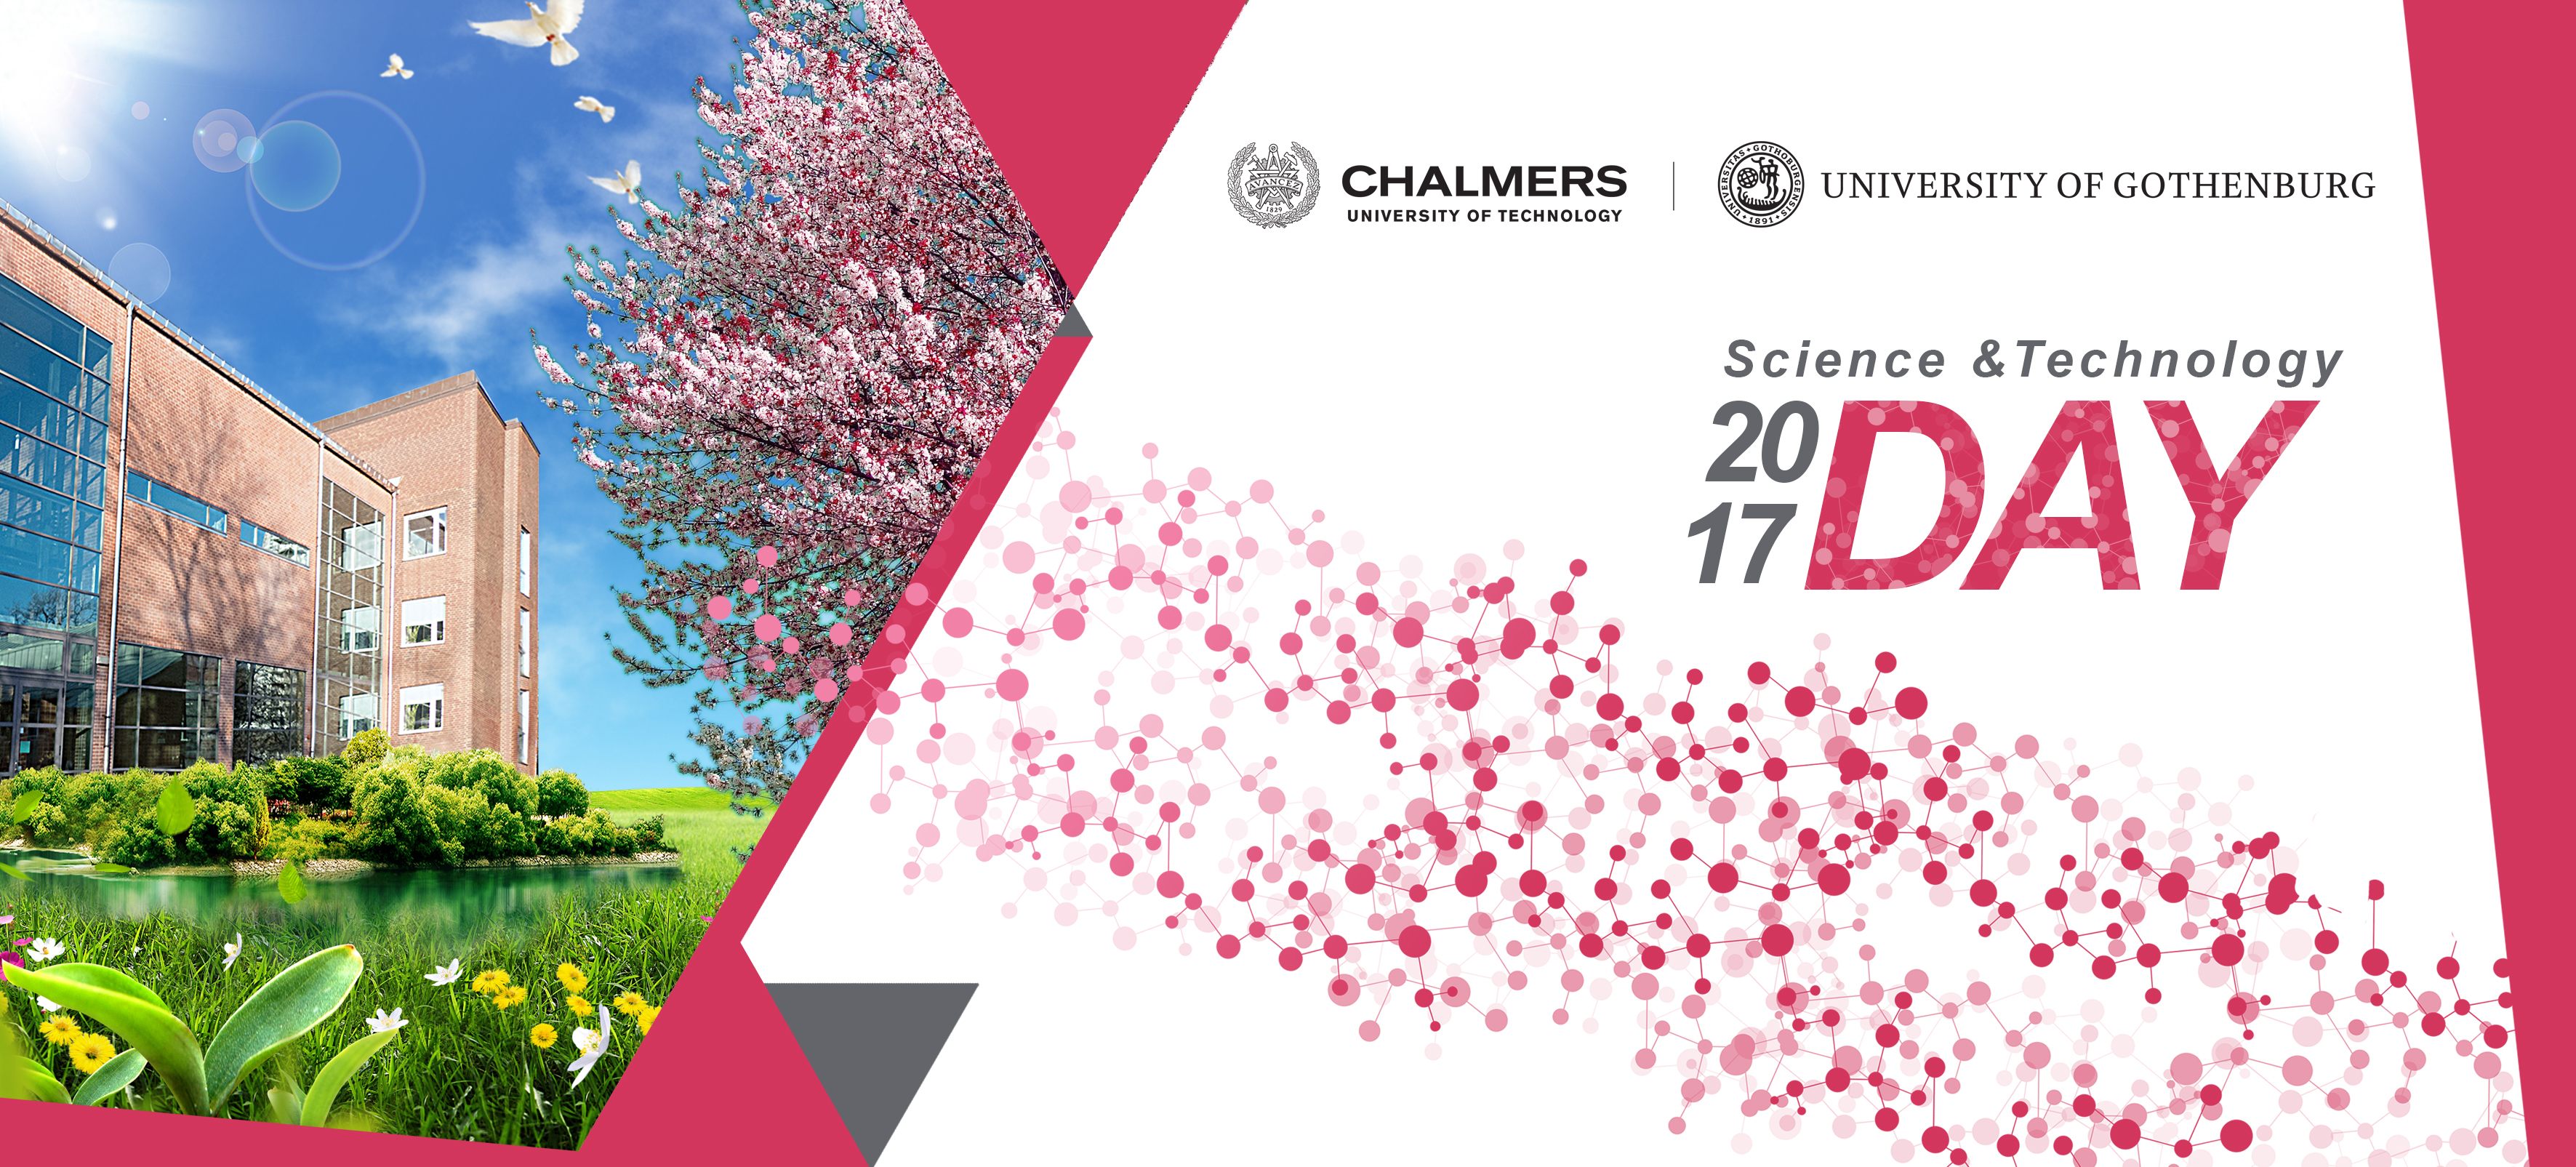 Science and Technology Day 2017 | Chalmers